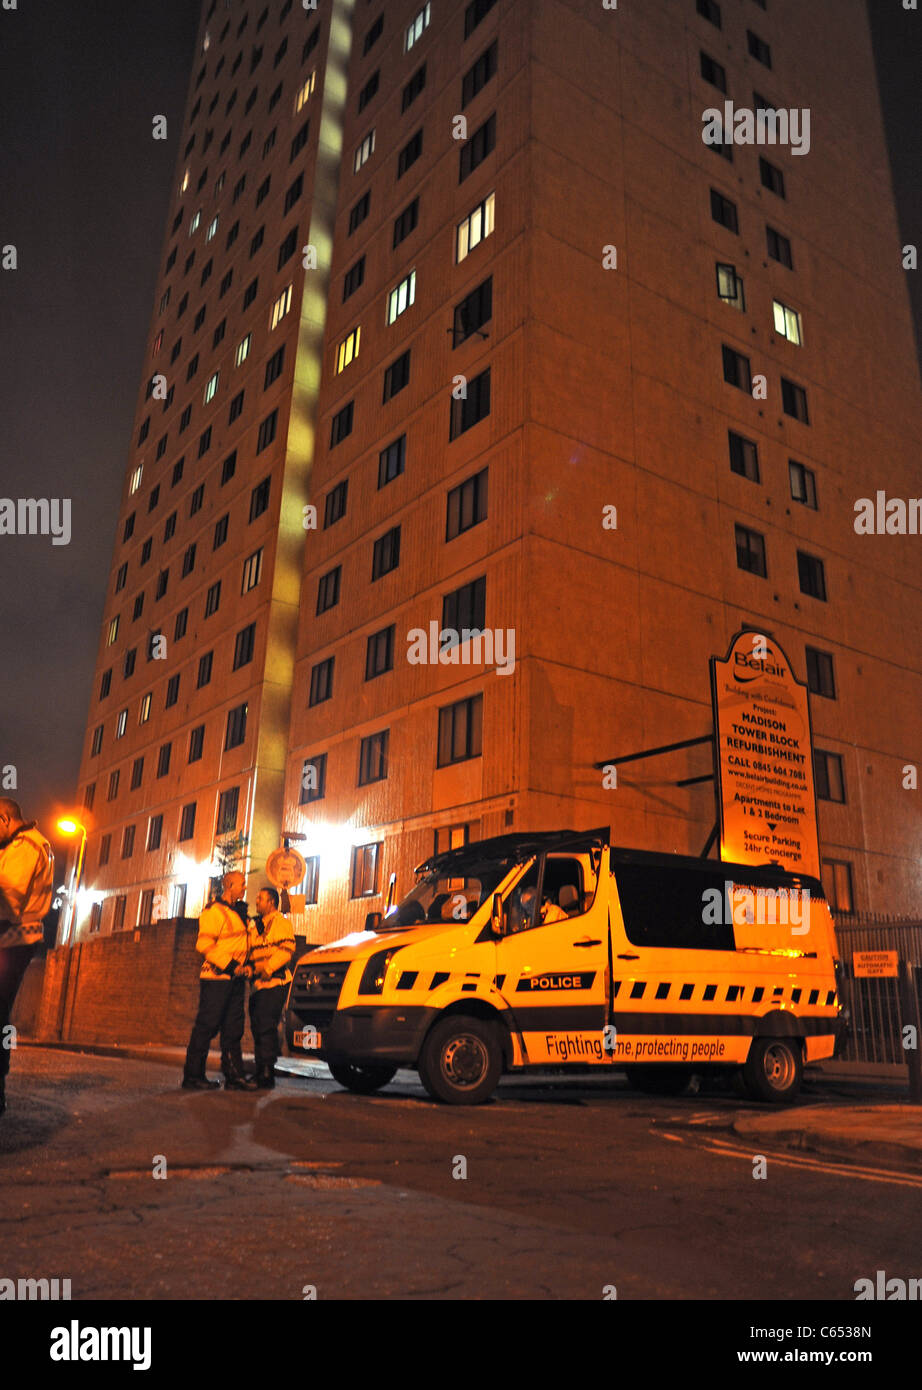 Anti-riot police squads deployed in the Salford suburb of Manchester in wake of the 2011 riots. Stock Photo